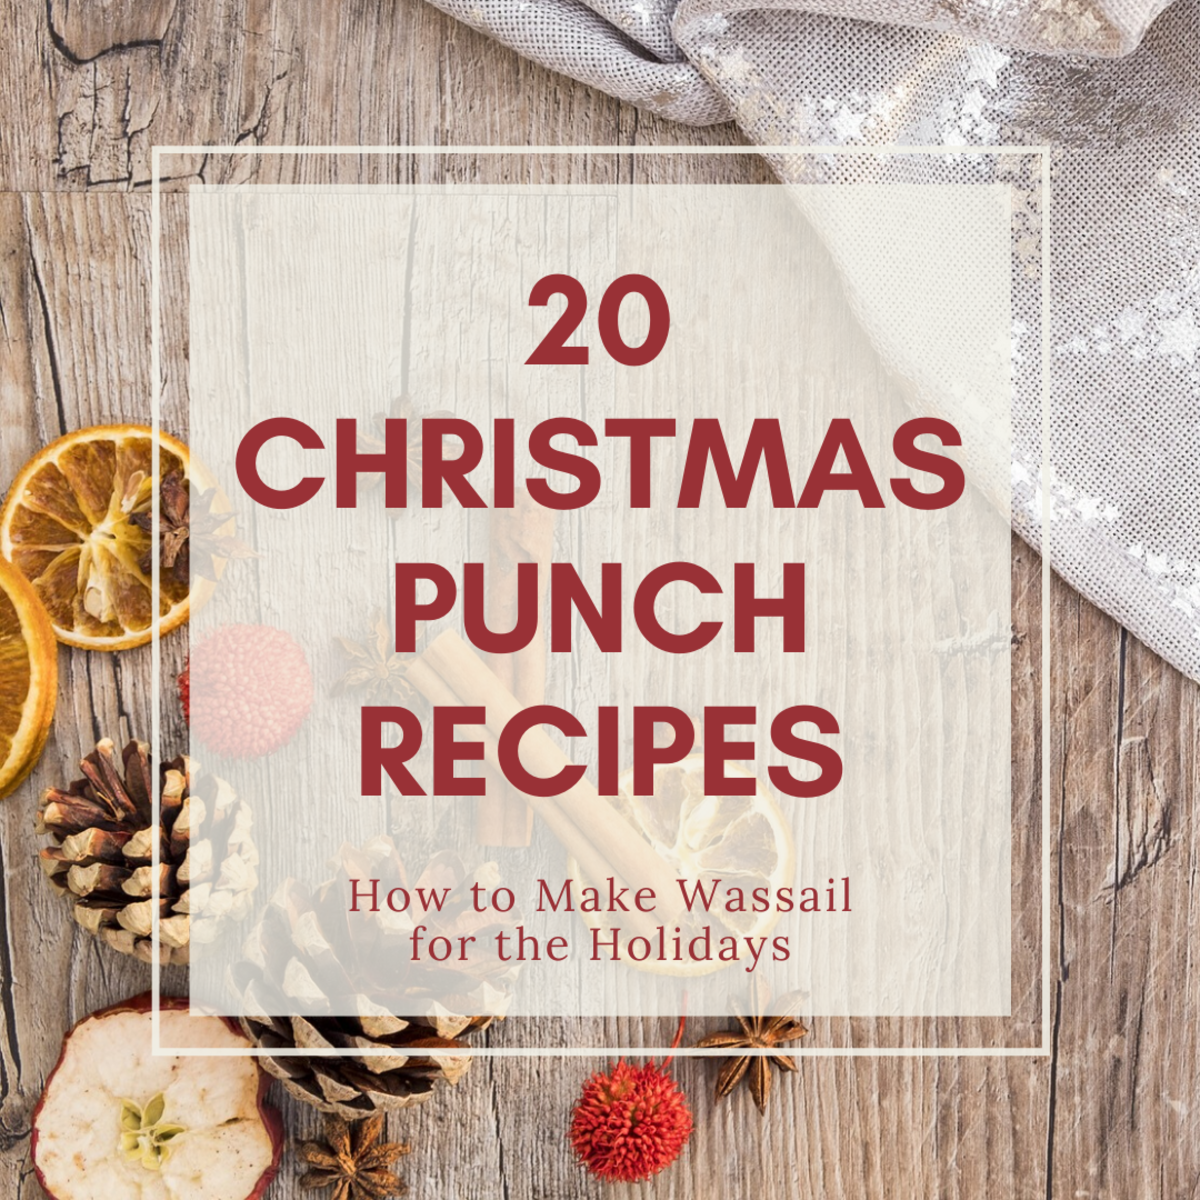 Christmas Punch That Warms the Soul: 20 Wassail Recipes